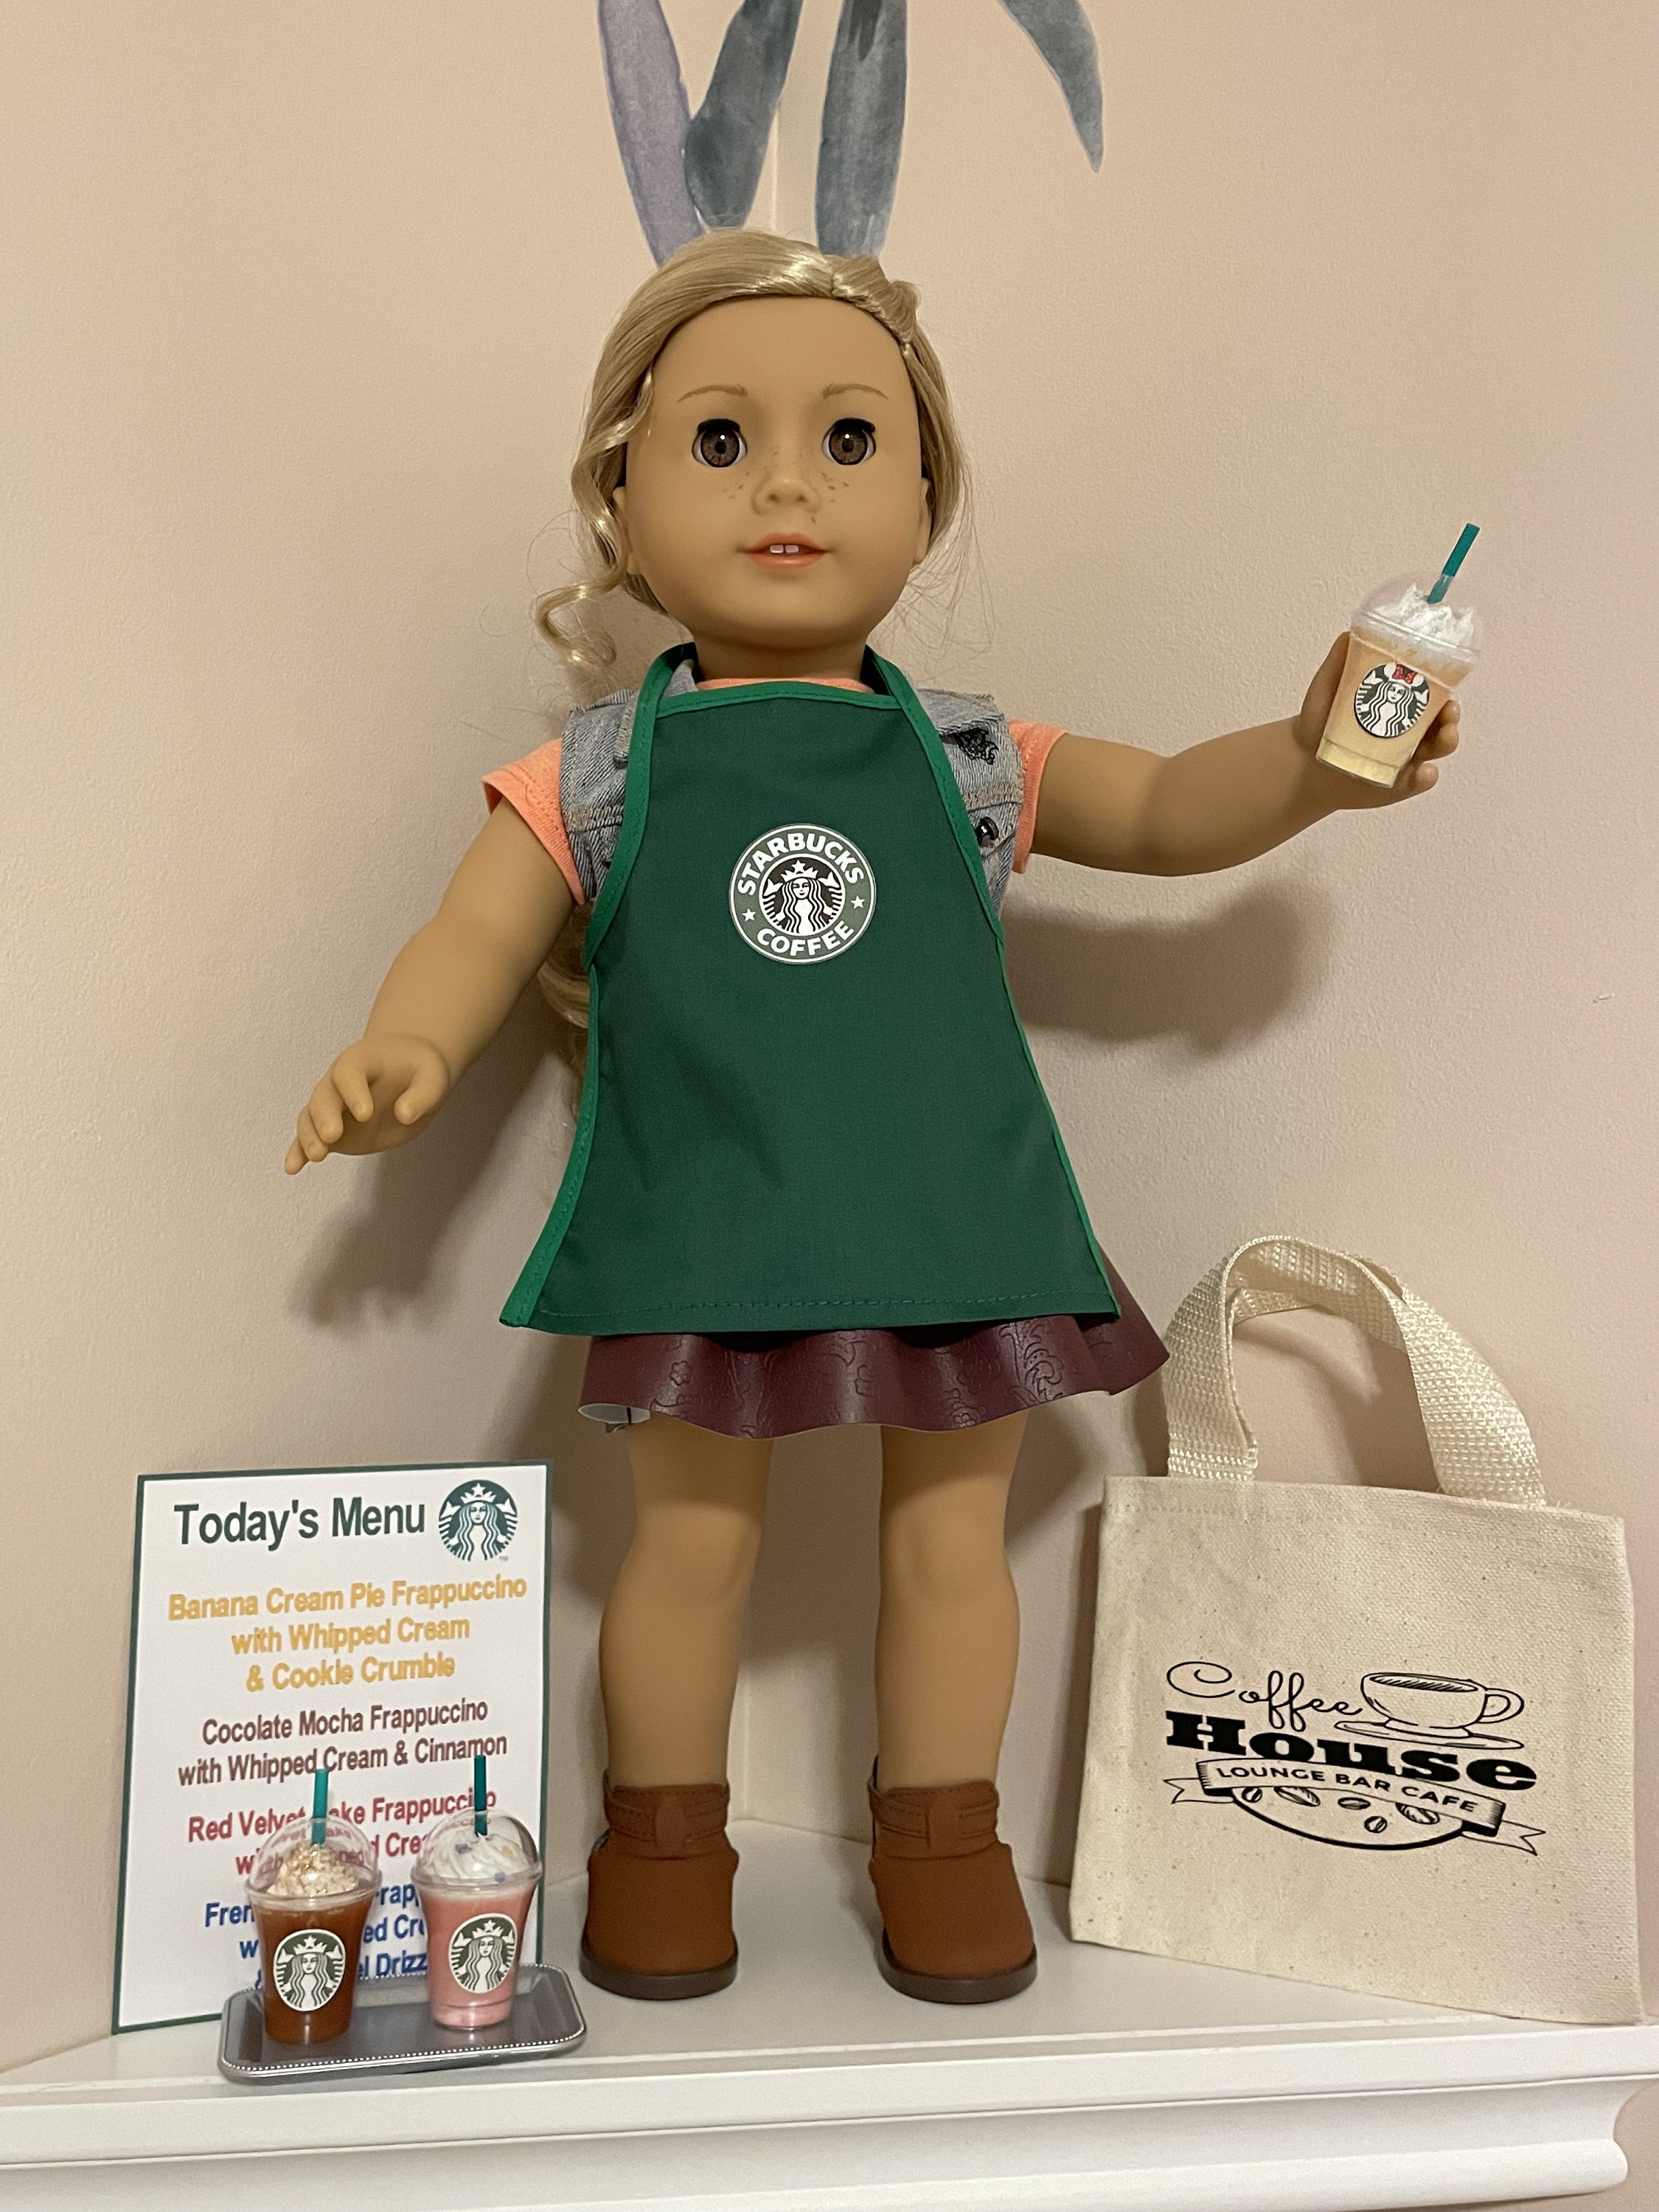  1/3 Scale Starbucks Citrus Lemonade 5 Piece Drink Set for  American Girl Dolls 18 Inch Doll Food Accessories Lot : Handmade Products